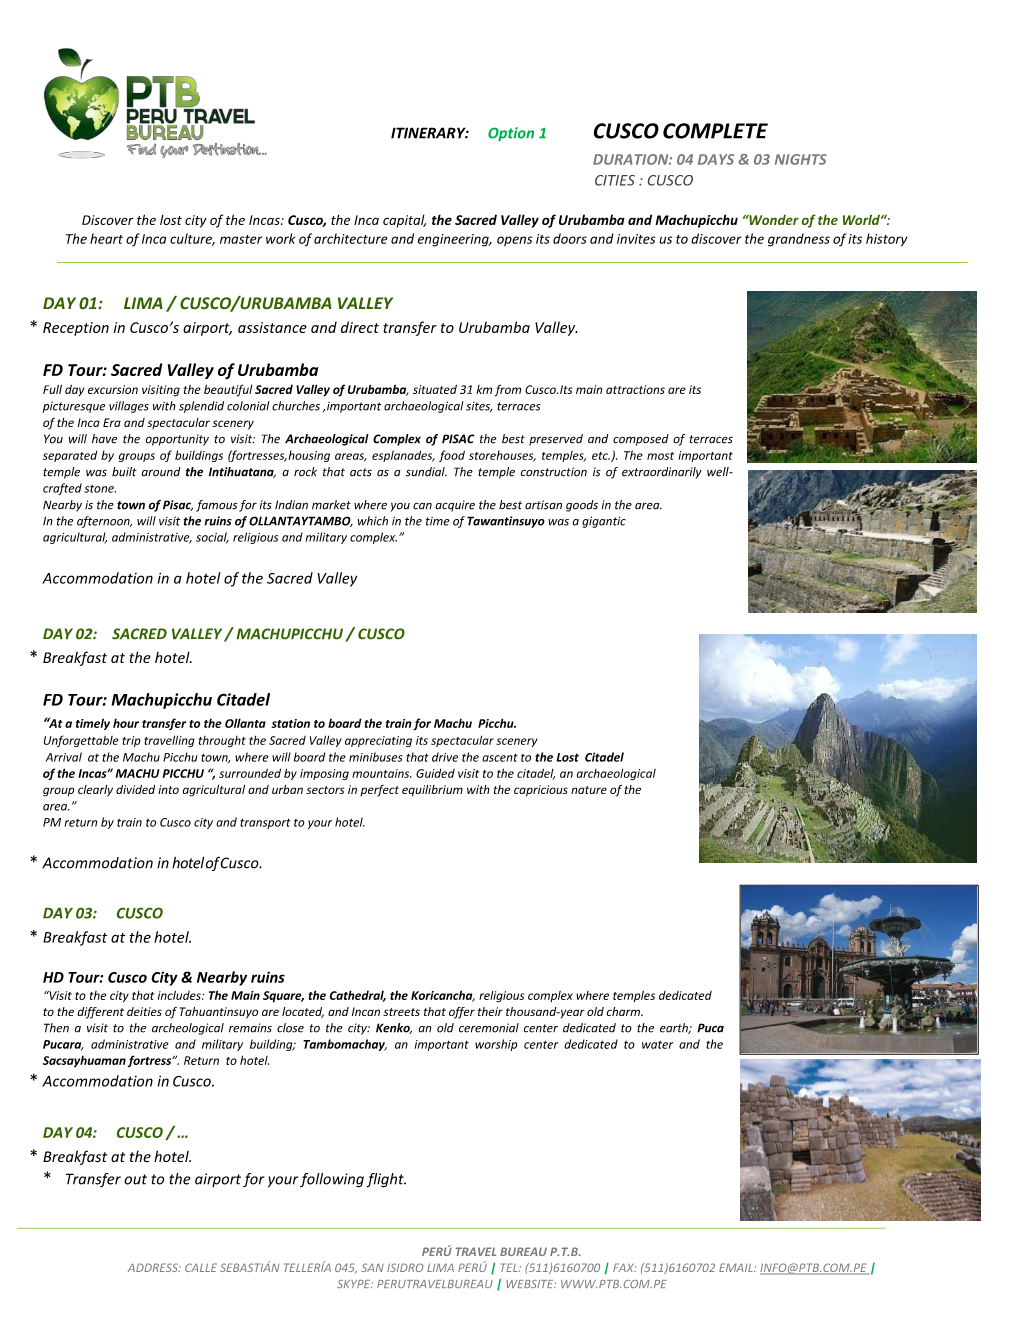 Cusco Complete Duration: 04 Days & 03 Nights Cities : Cusco